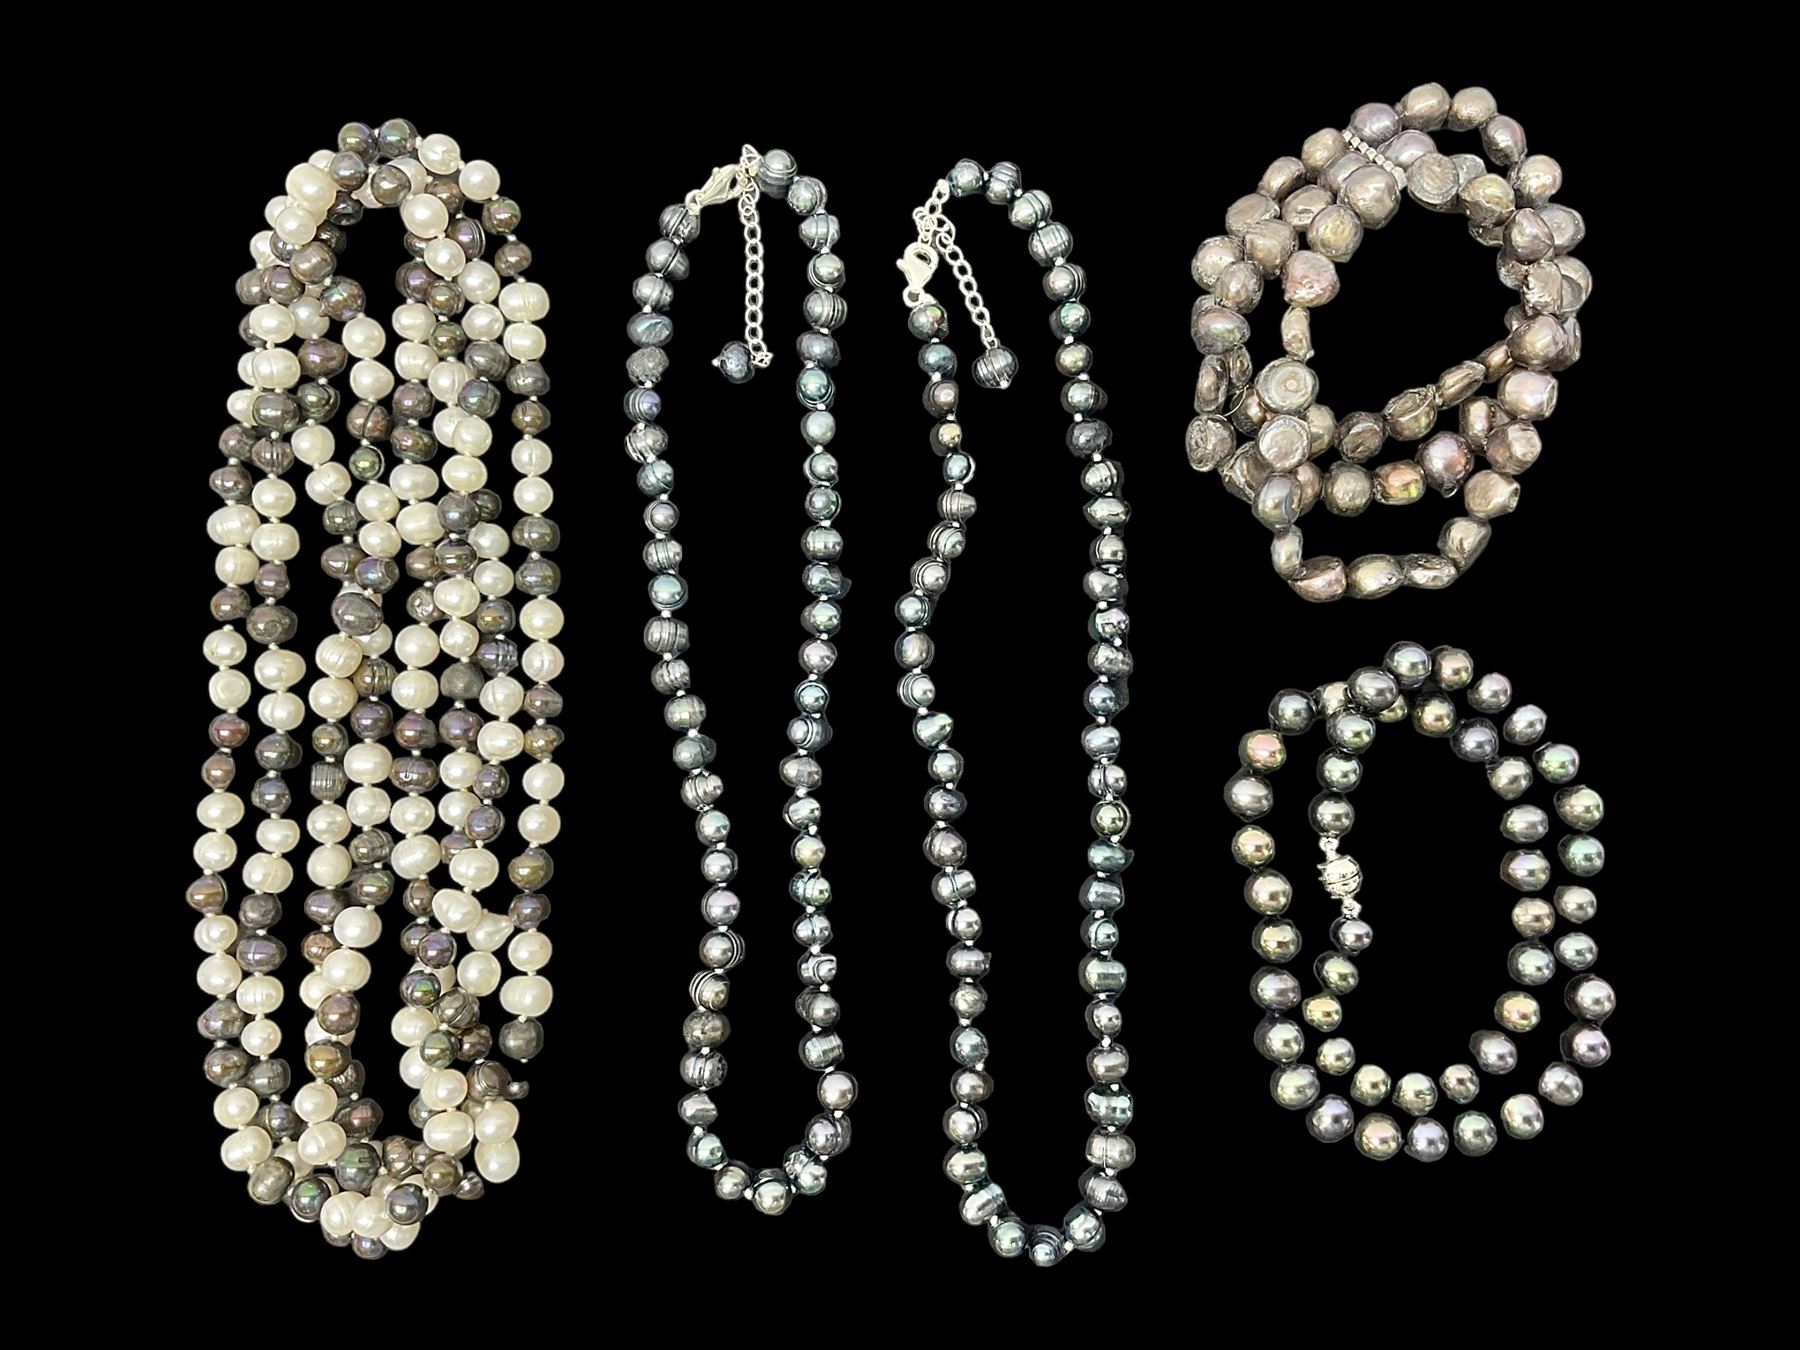 Four fresh water pearl necklaces - Image 56 of 77